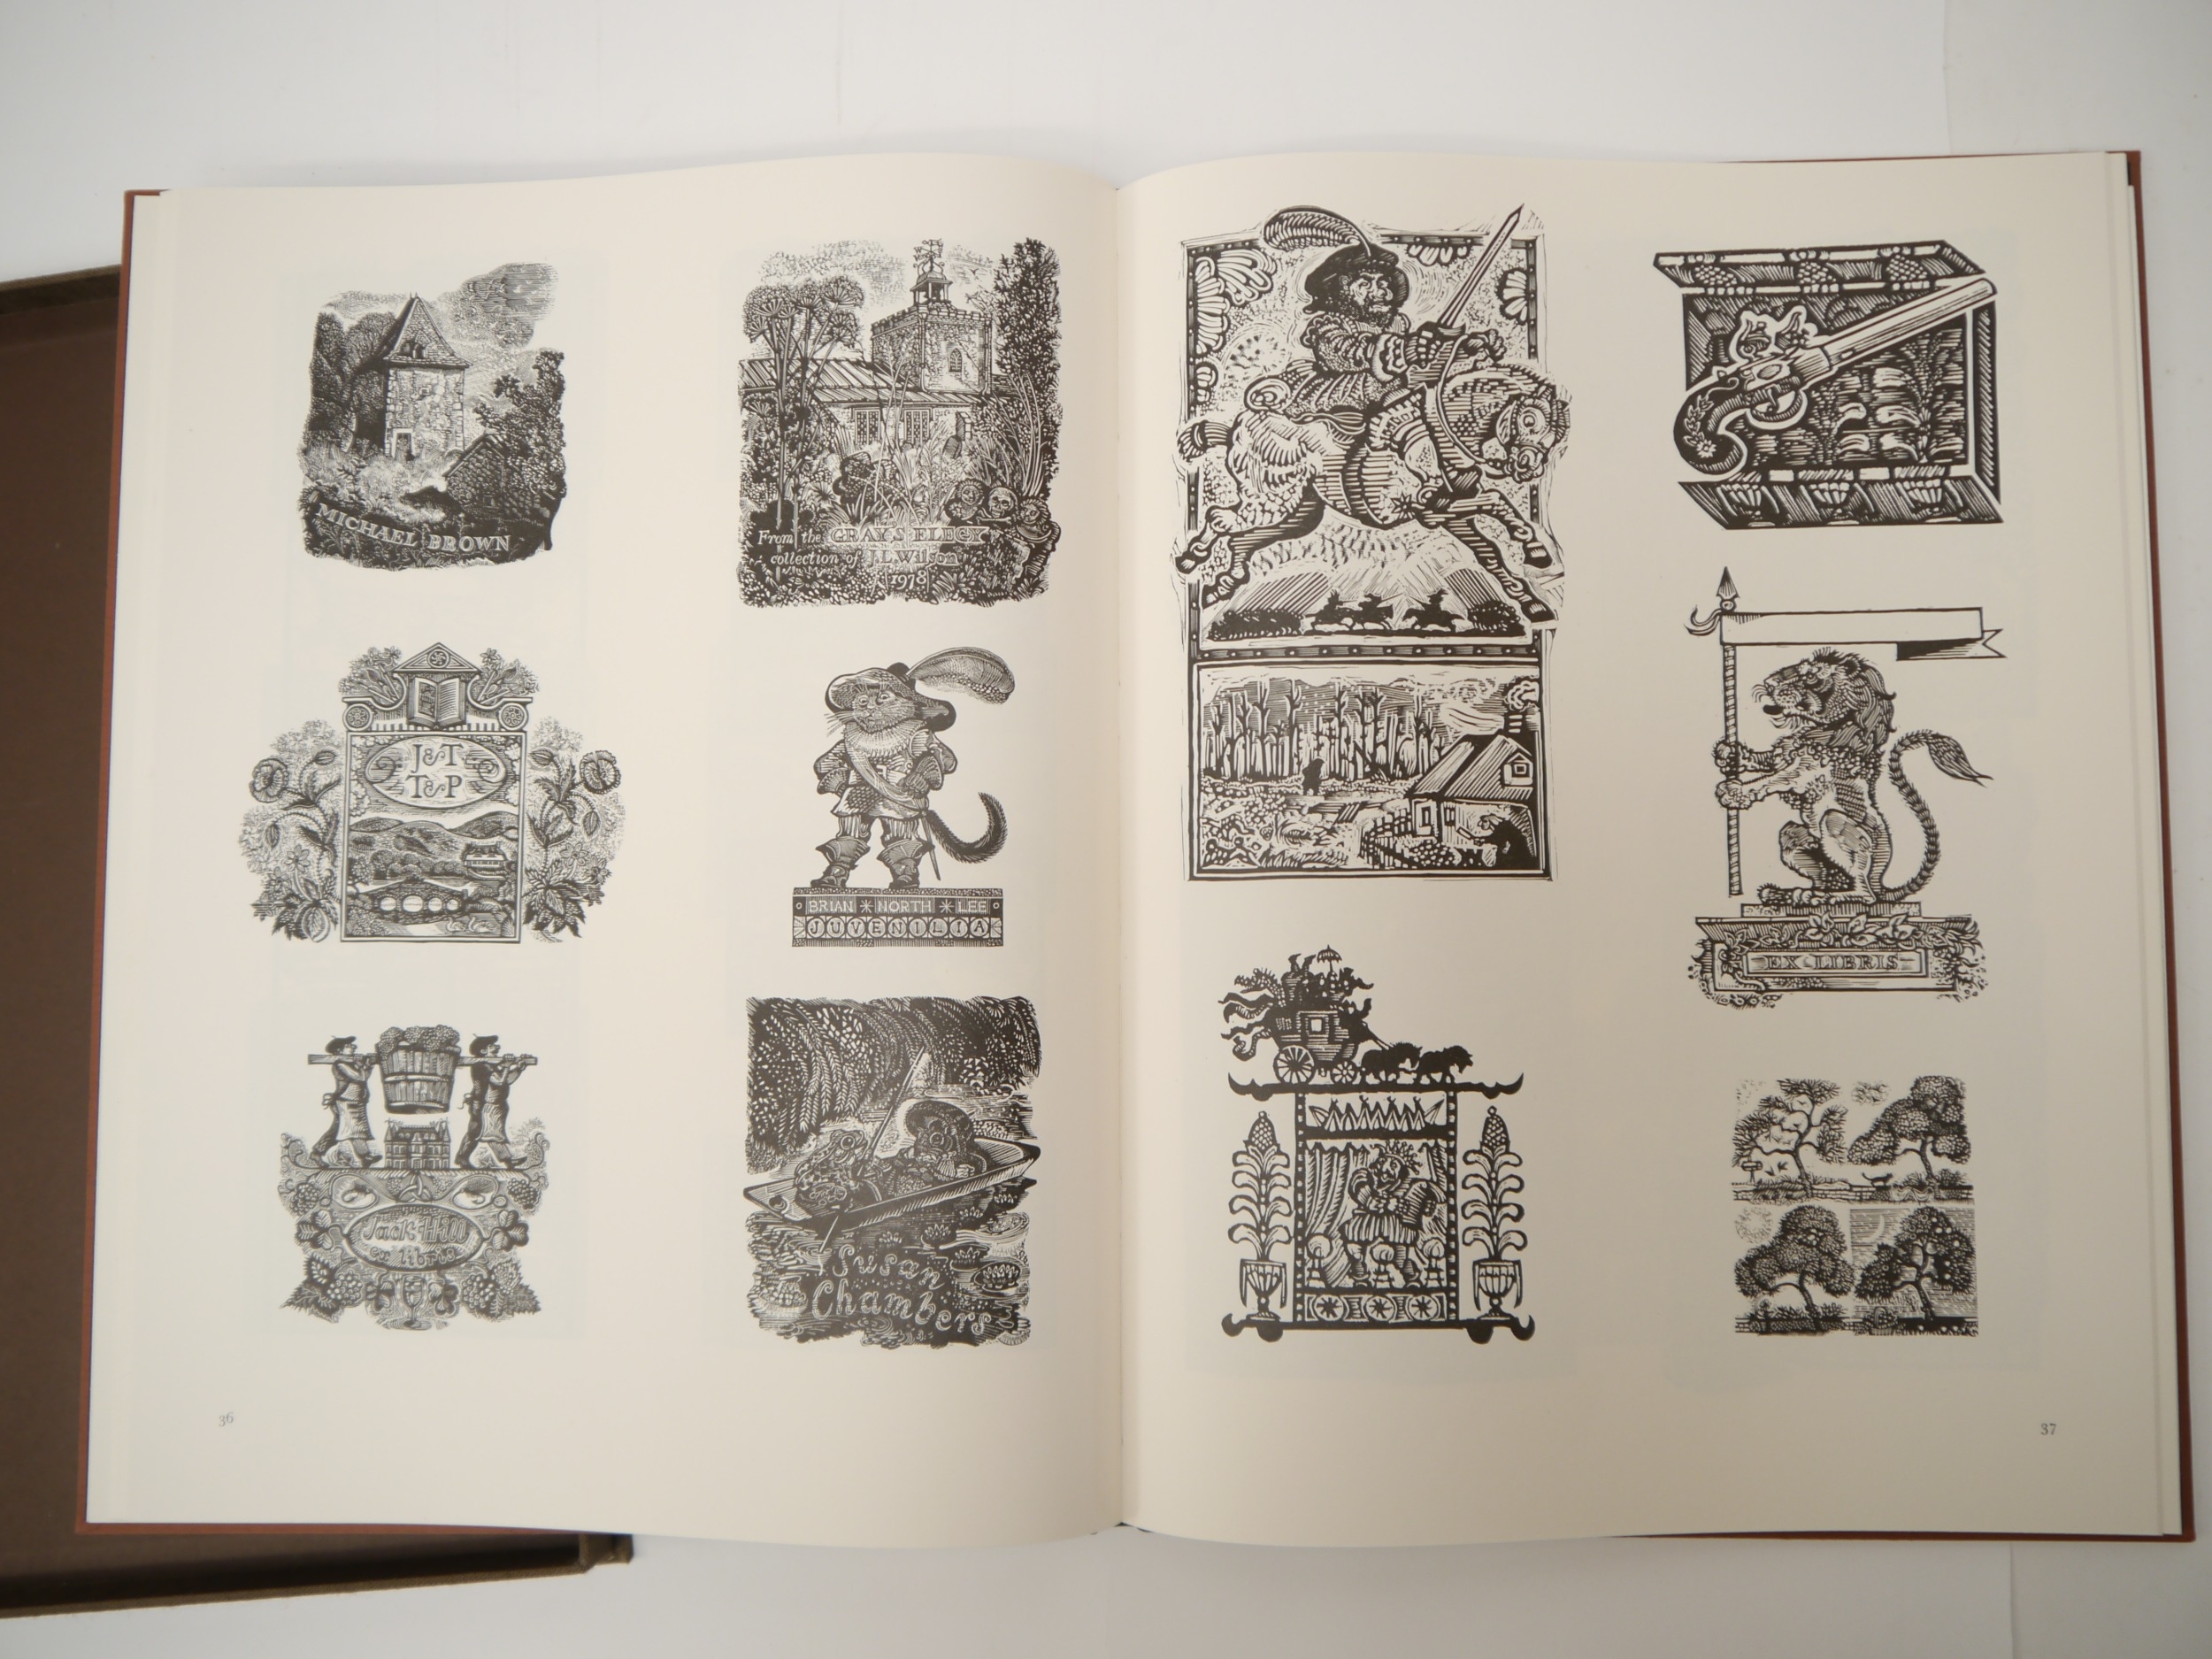 John Lawrence: 'A Selection of Wood Engravings', London, The Camberwell Press, 1986, limited edition - Image 2 of 7